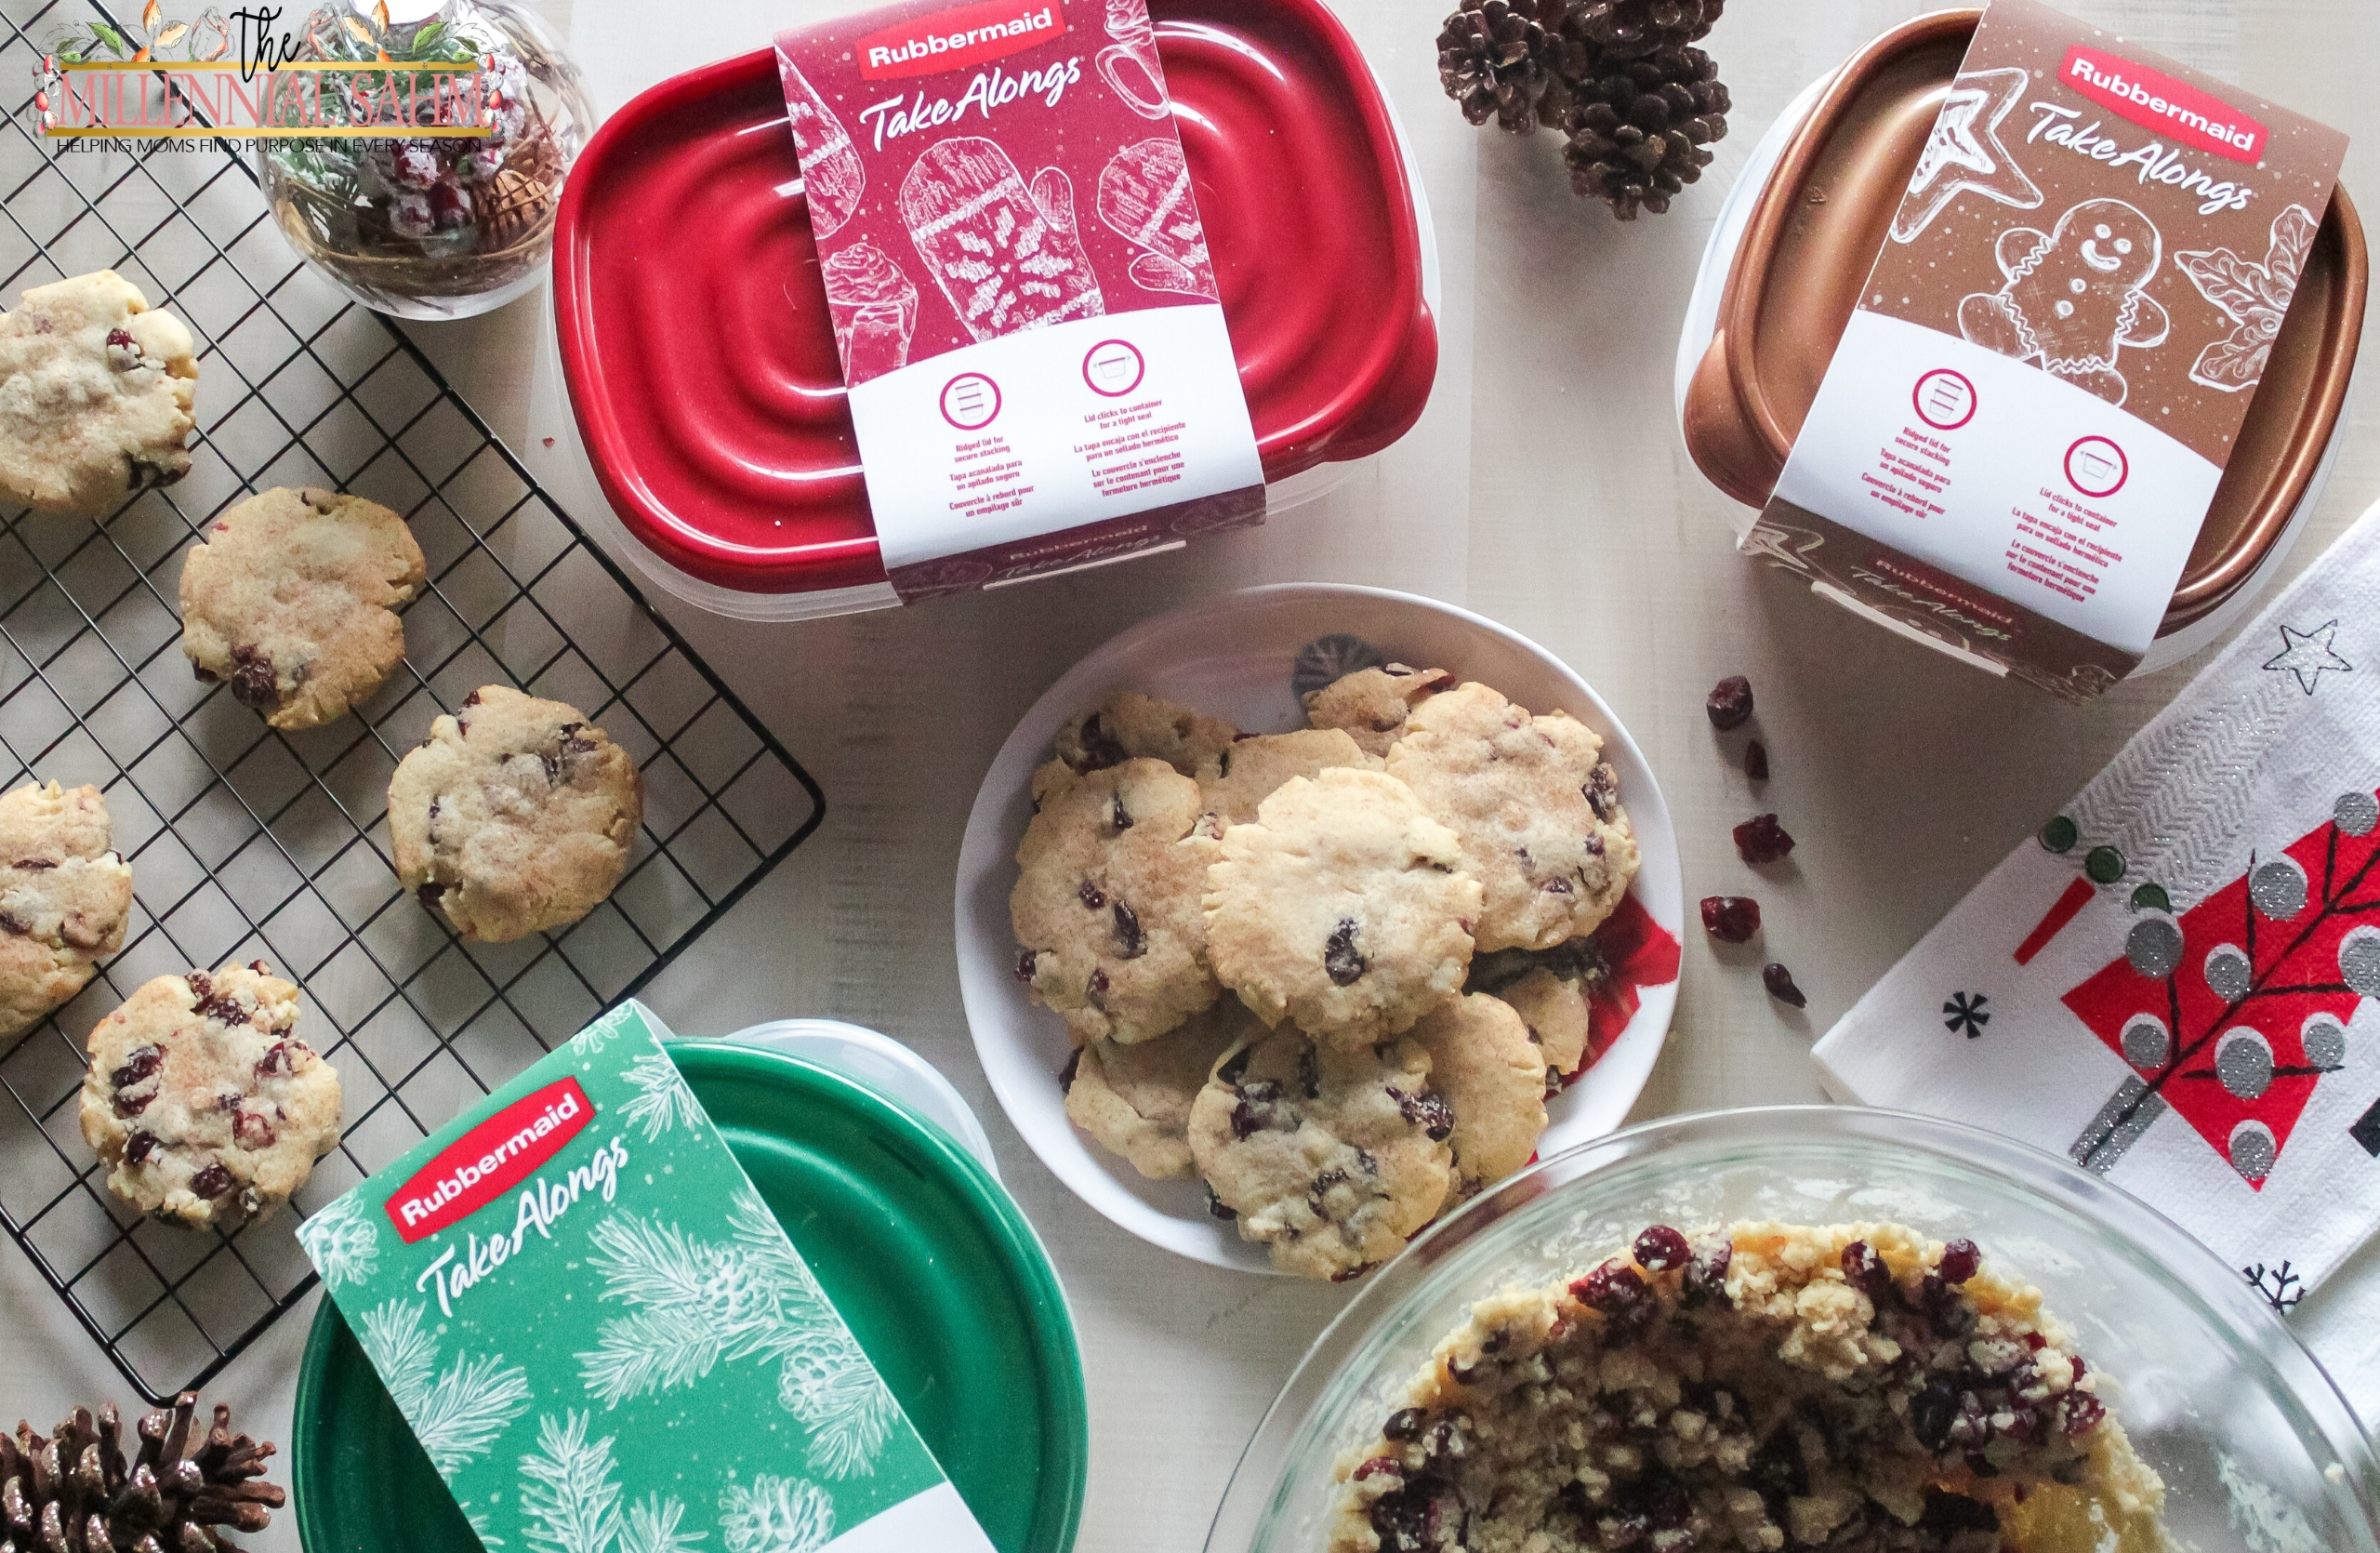 Learn three easy ways that you can host your very own stress-free Christmas Cookie Exchange, as well as a delicious Cranberry Cinnamon Sugar Cookie recipe that is sure to put your guests in the holiday spirit!